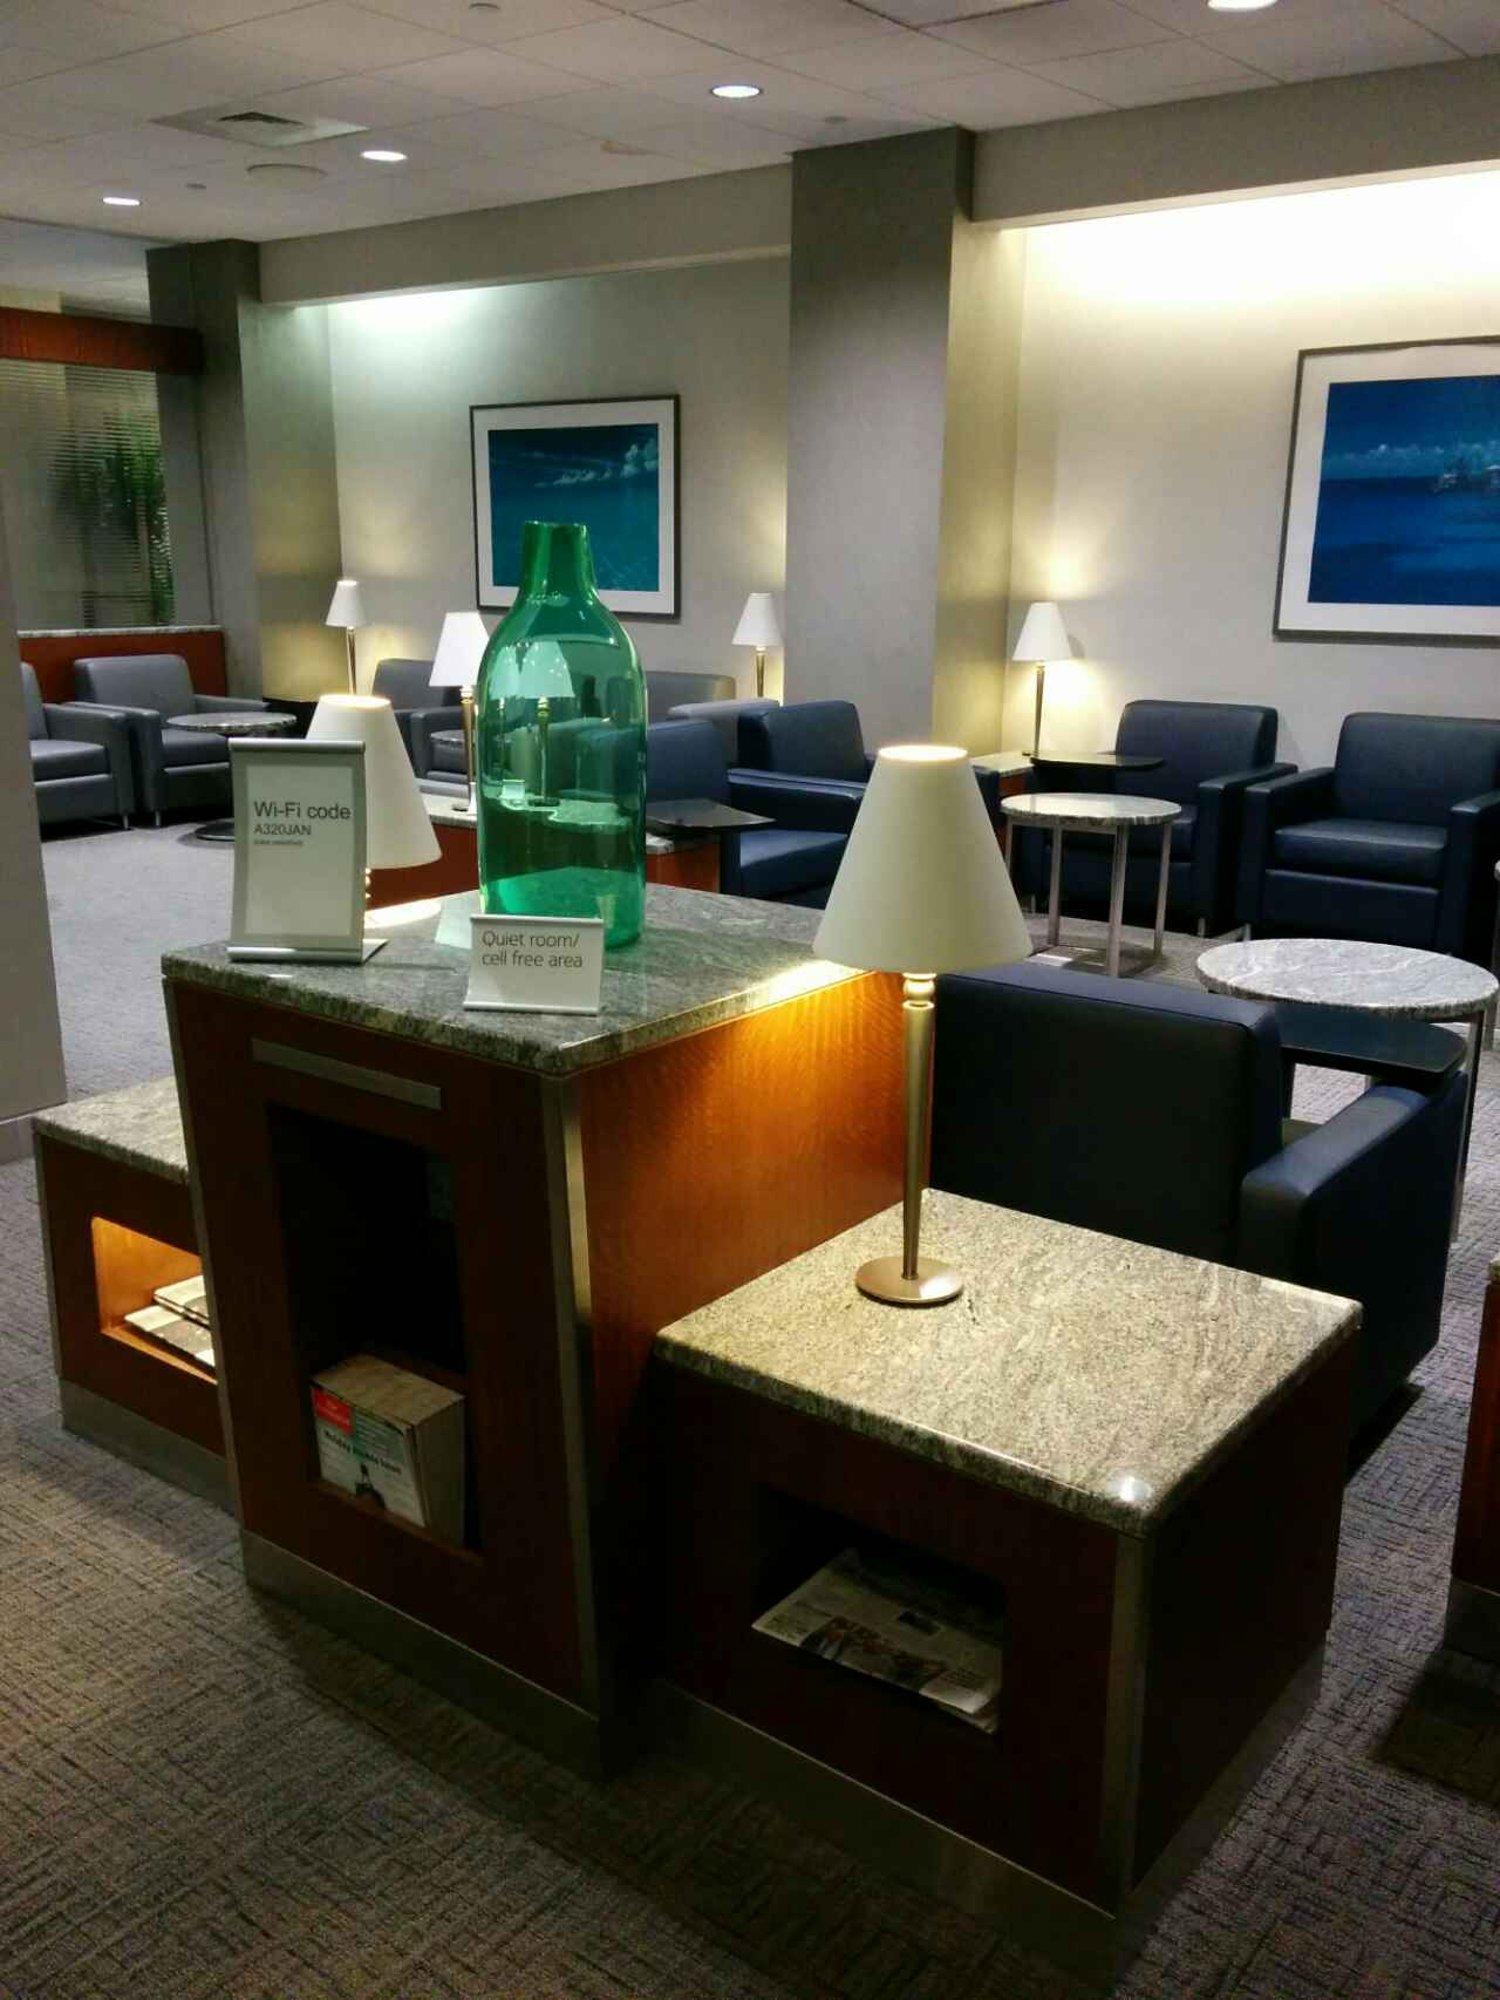 American Airlines Admirals Club image 48 of 48